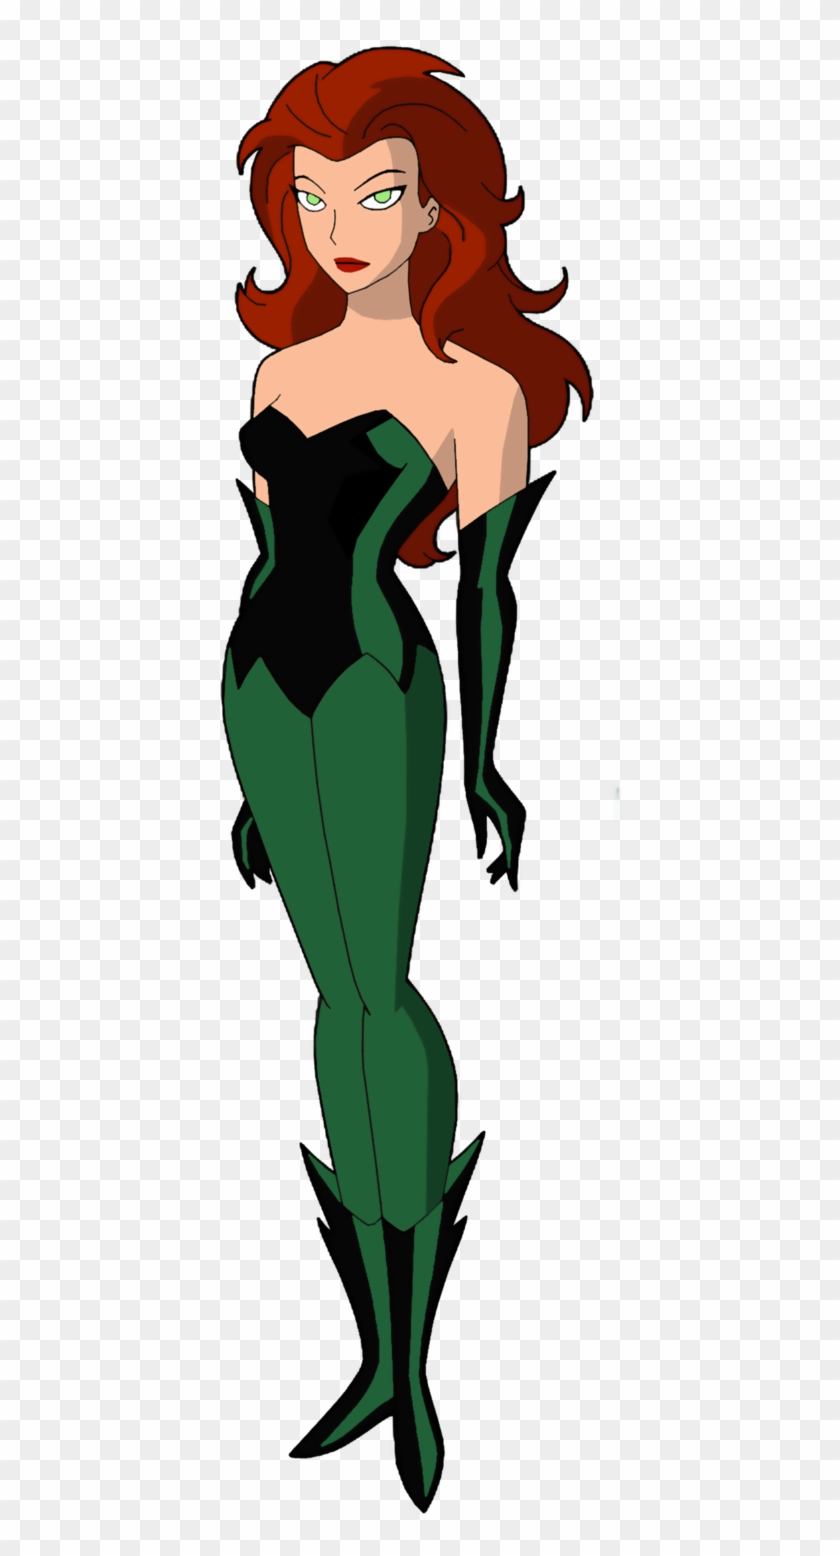 Poison Ivy Bruce Timm Style New Look By Noahlc - Poison Ivy Batman The Animated Series #596177